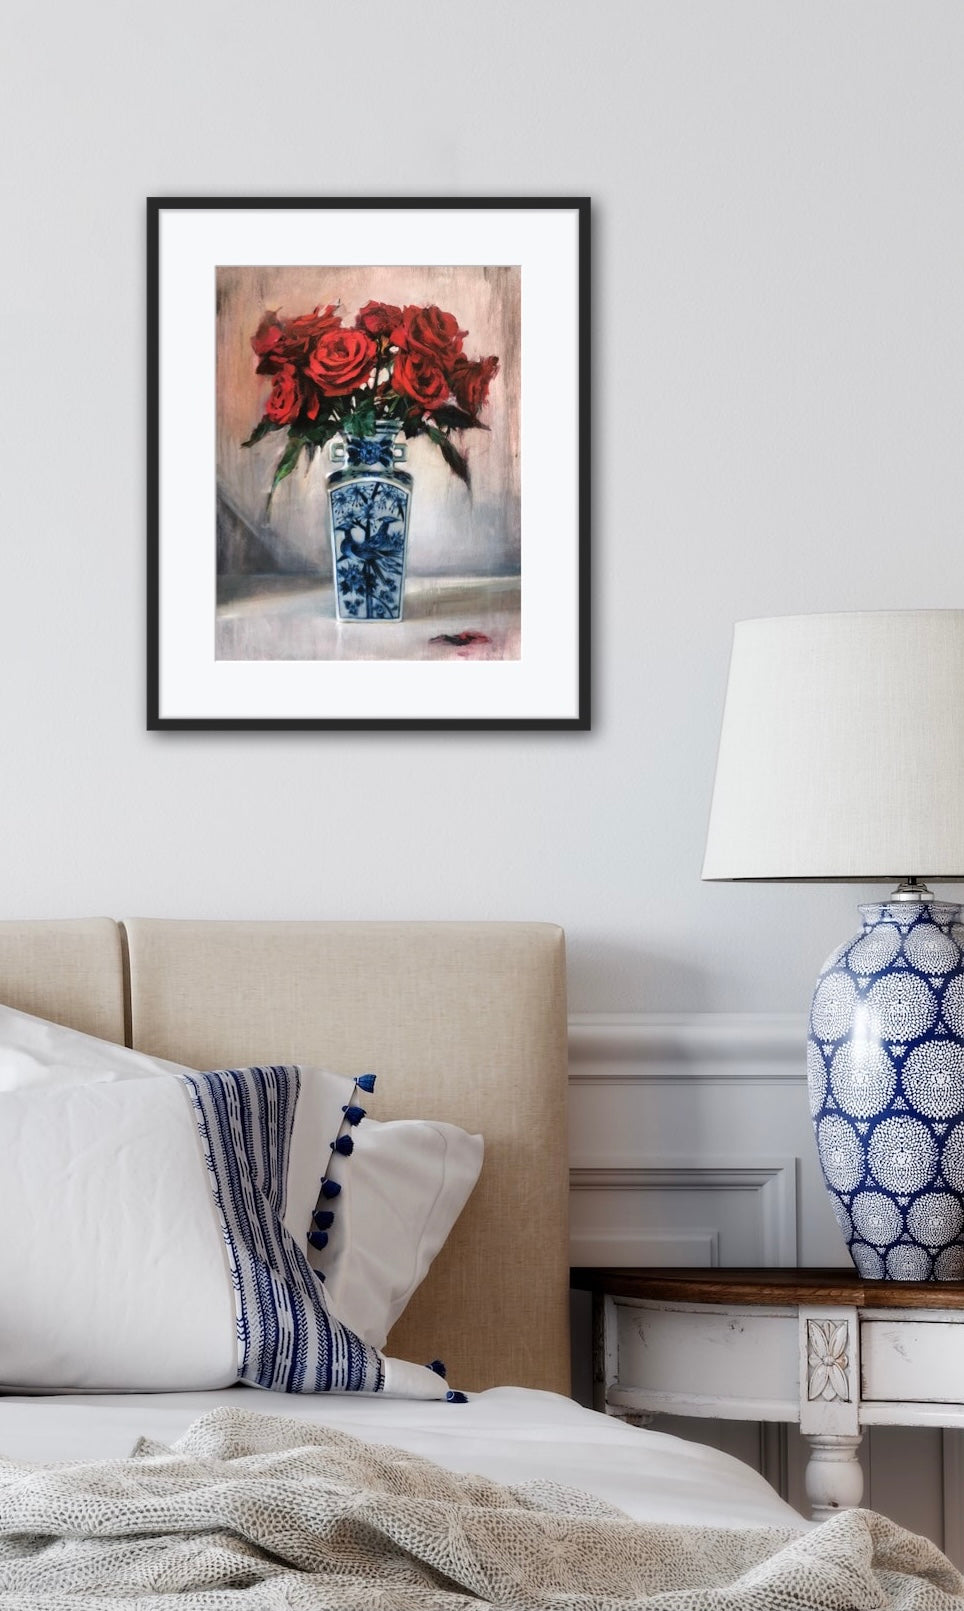 'Thinking of you' - Fine Art Print of Roses